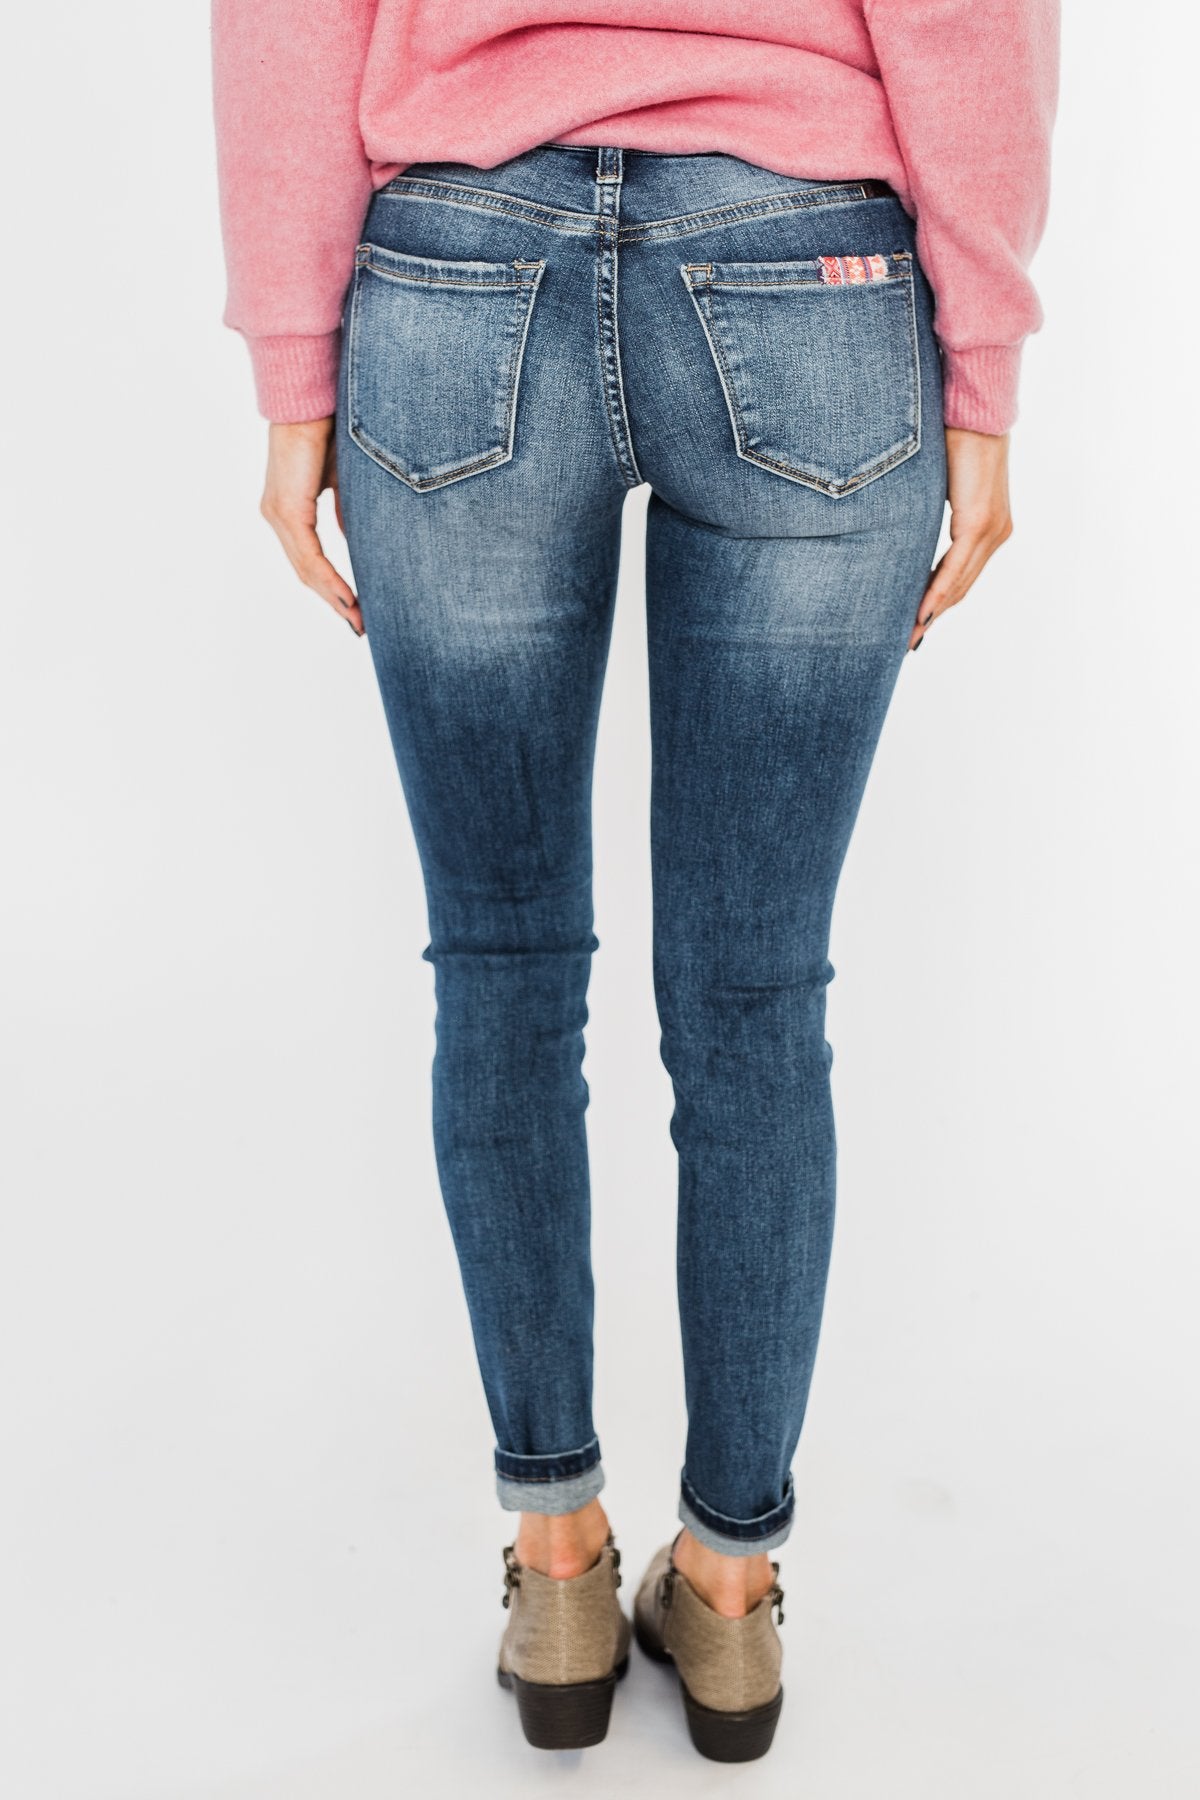 KanCan Distressed Skinny Jeans- Aztec Patch